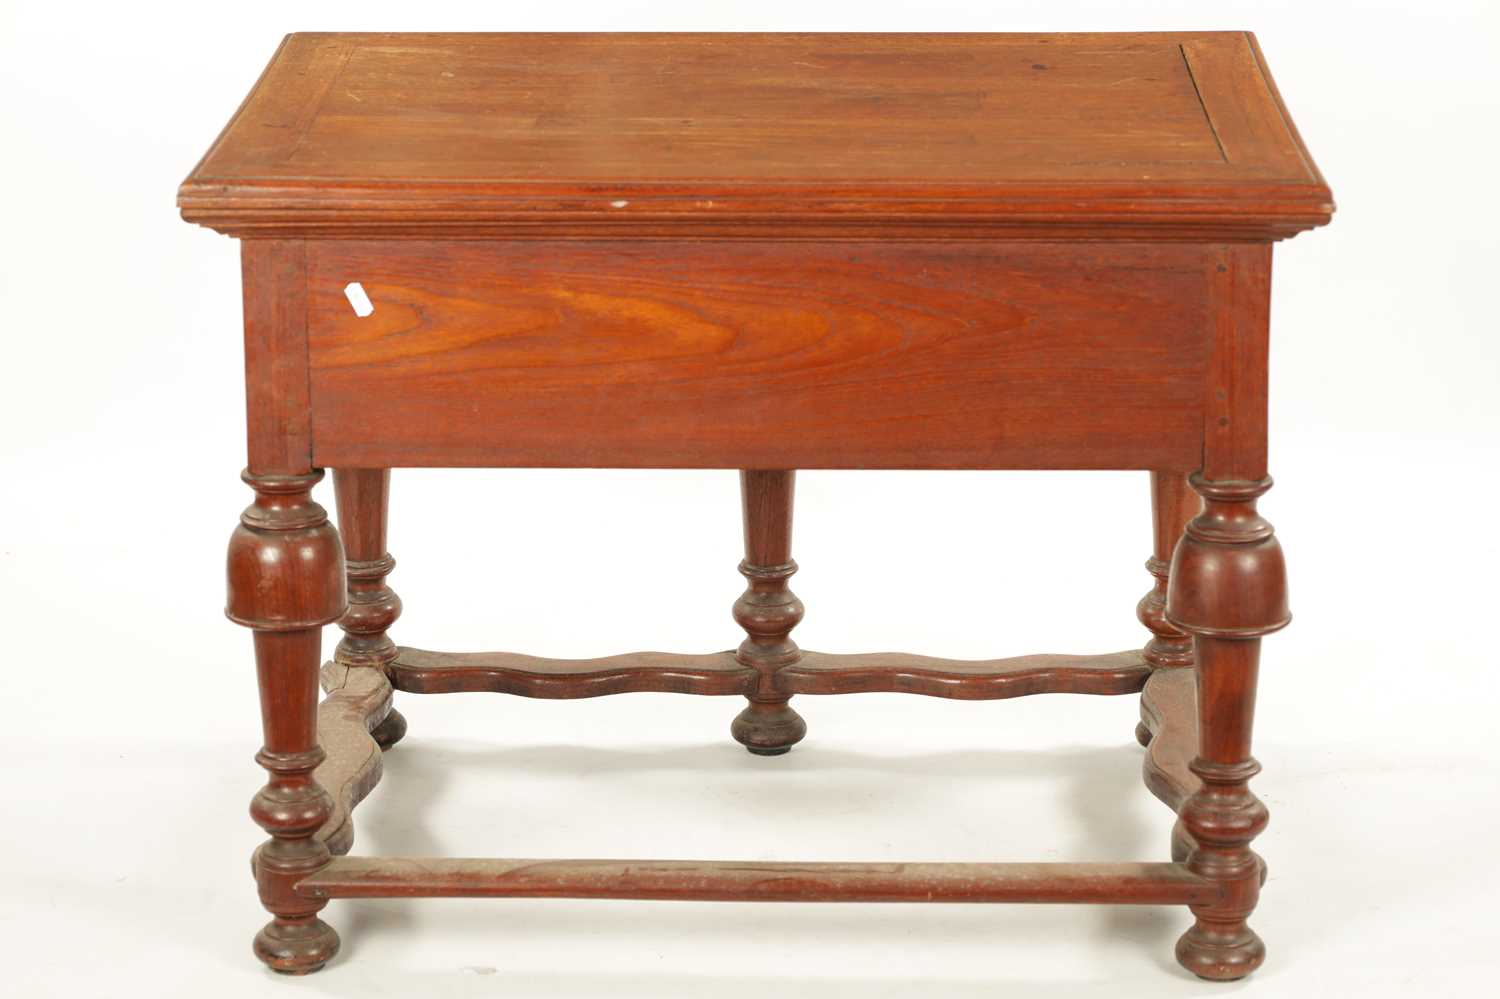 AN UNUSUAL 18TH CENTURY COLONIAL PADOUK WOOD TWO DRAWER TABLE ON BALLUSTER LEGS WITH SHAPED STRETCHE - Image 8 of 8